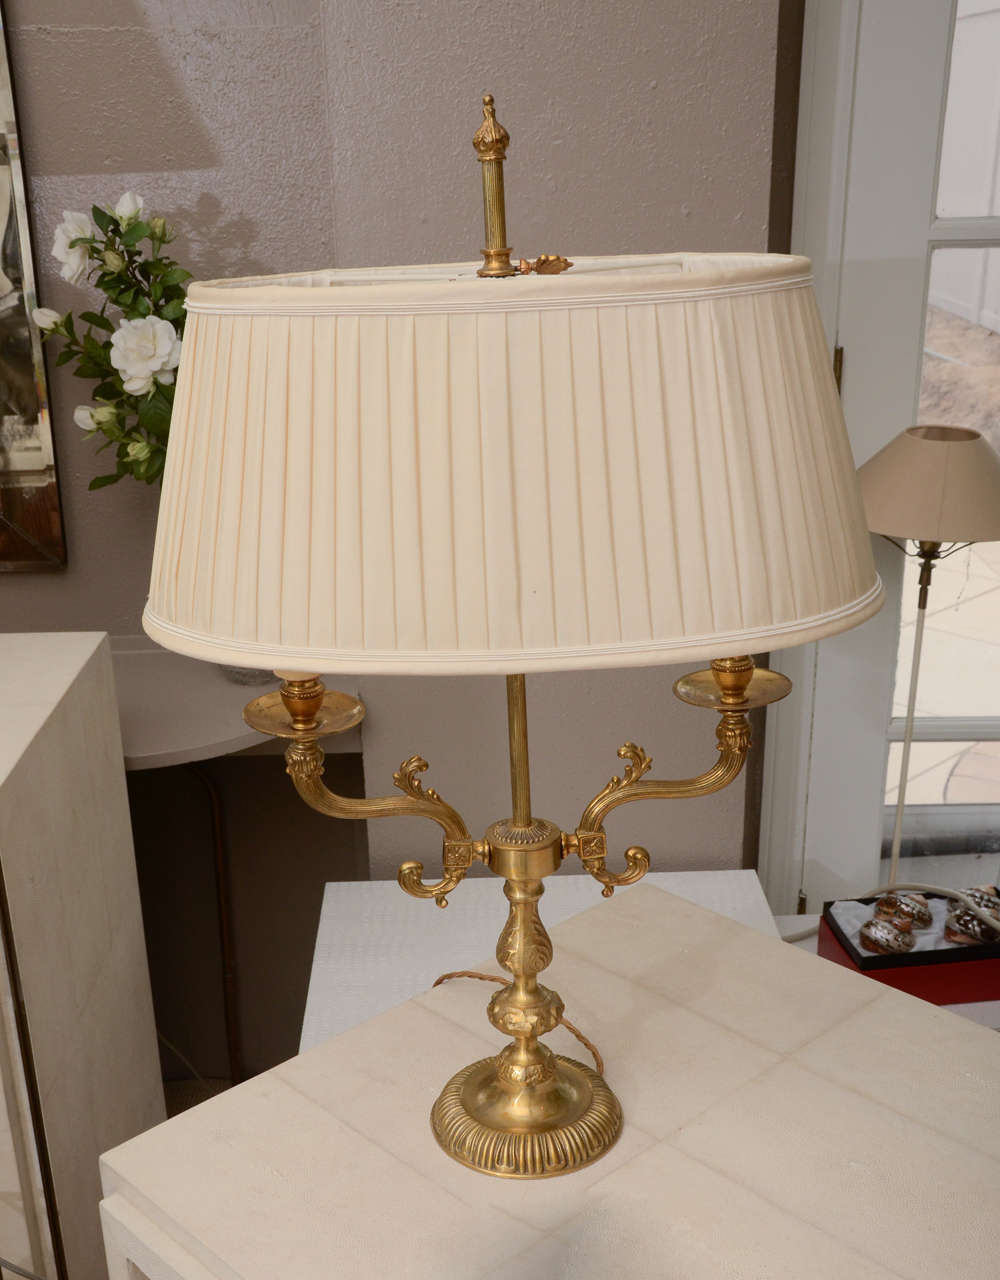 2-armed Dore bronze candlestick lamp with silk pleated shade. The height to the top of the finial is 27 in